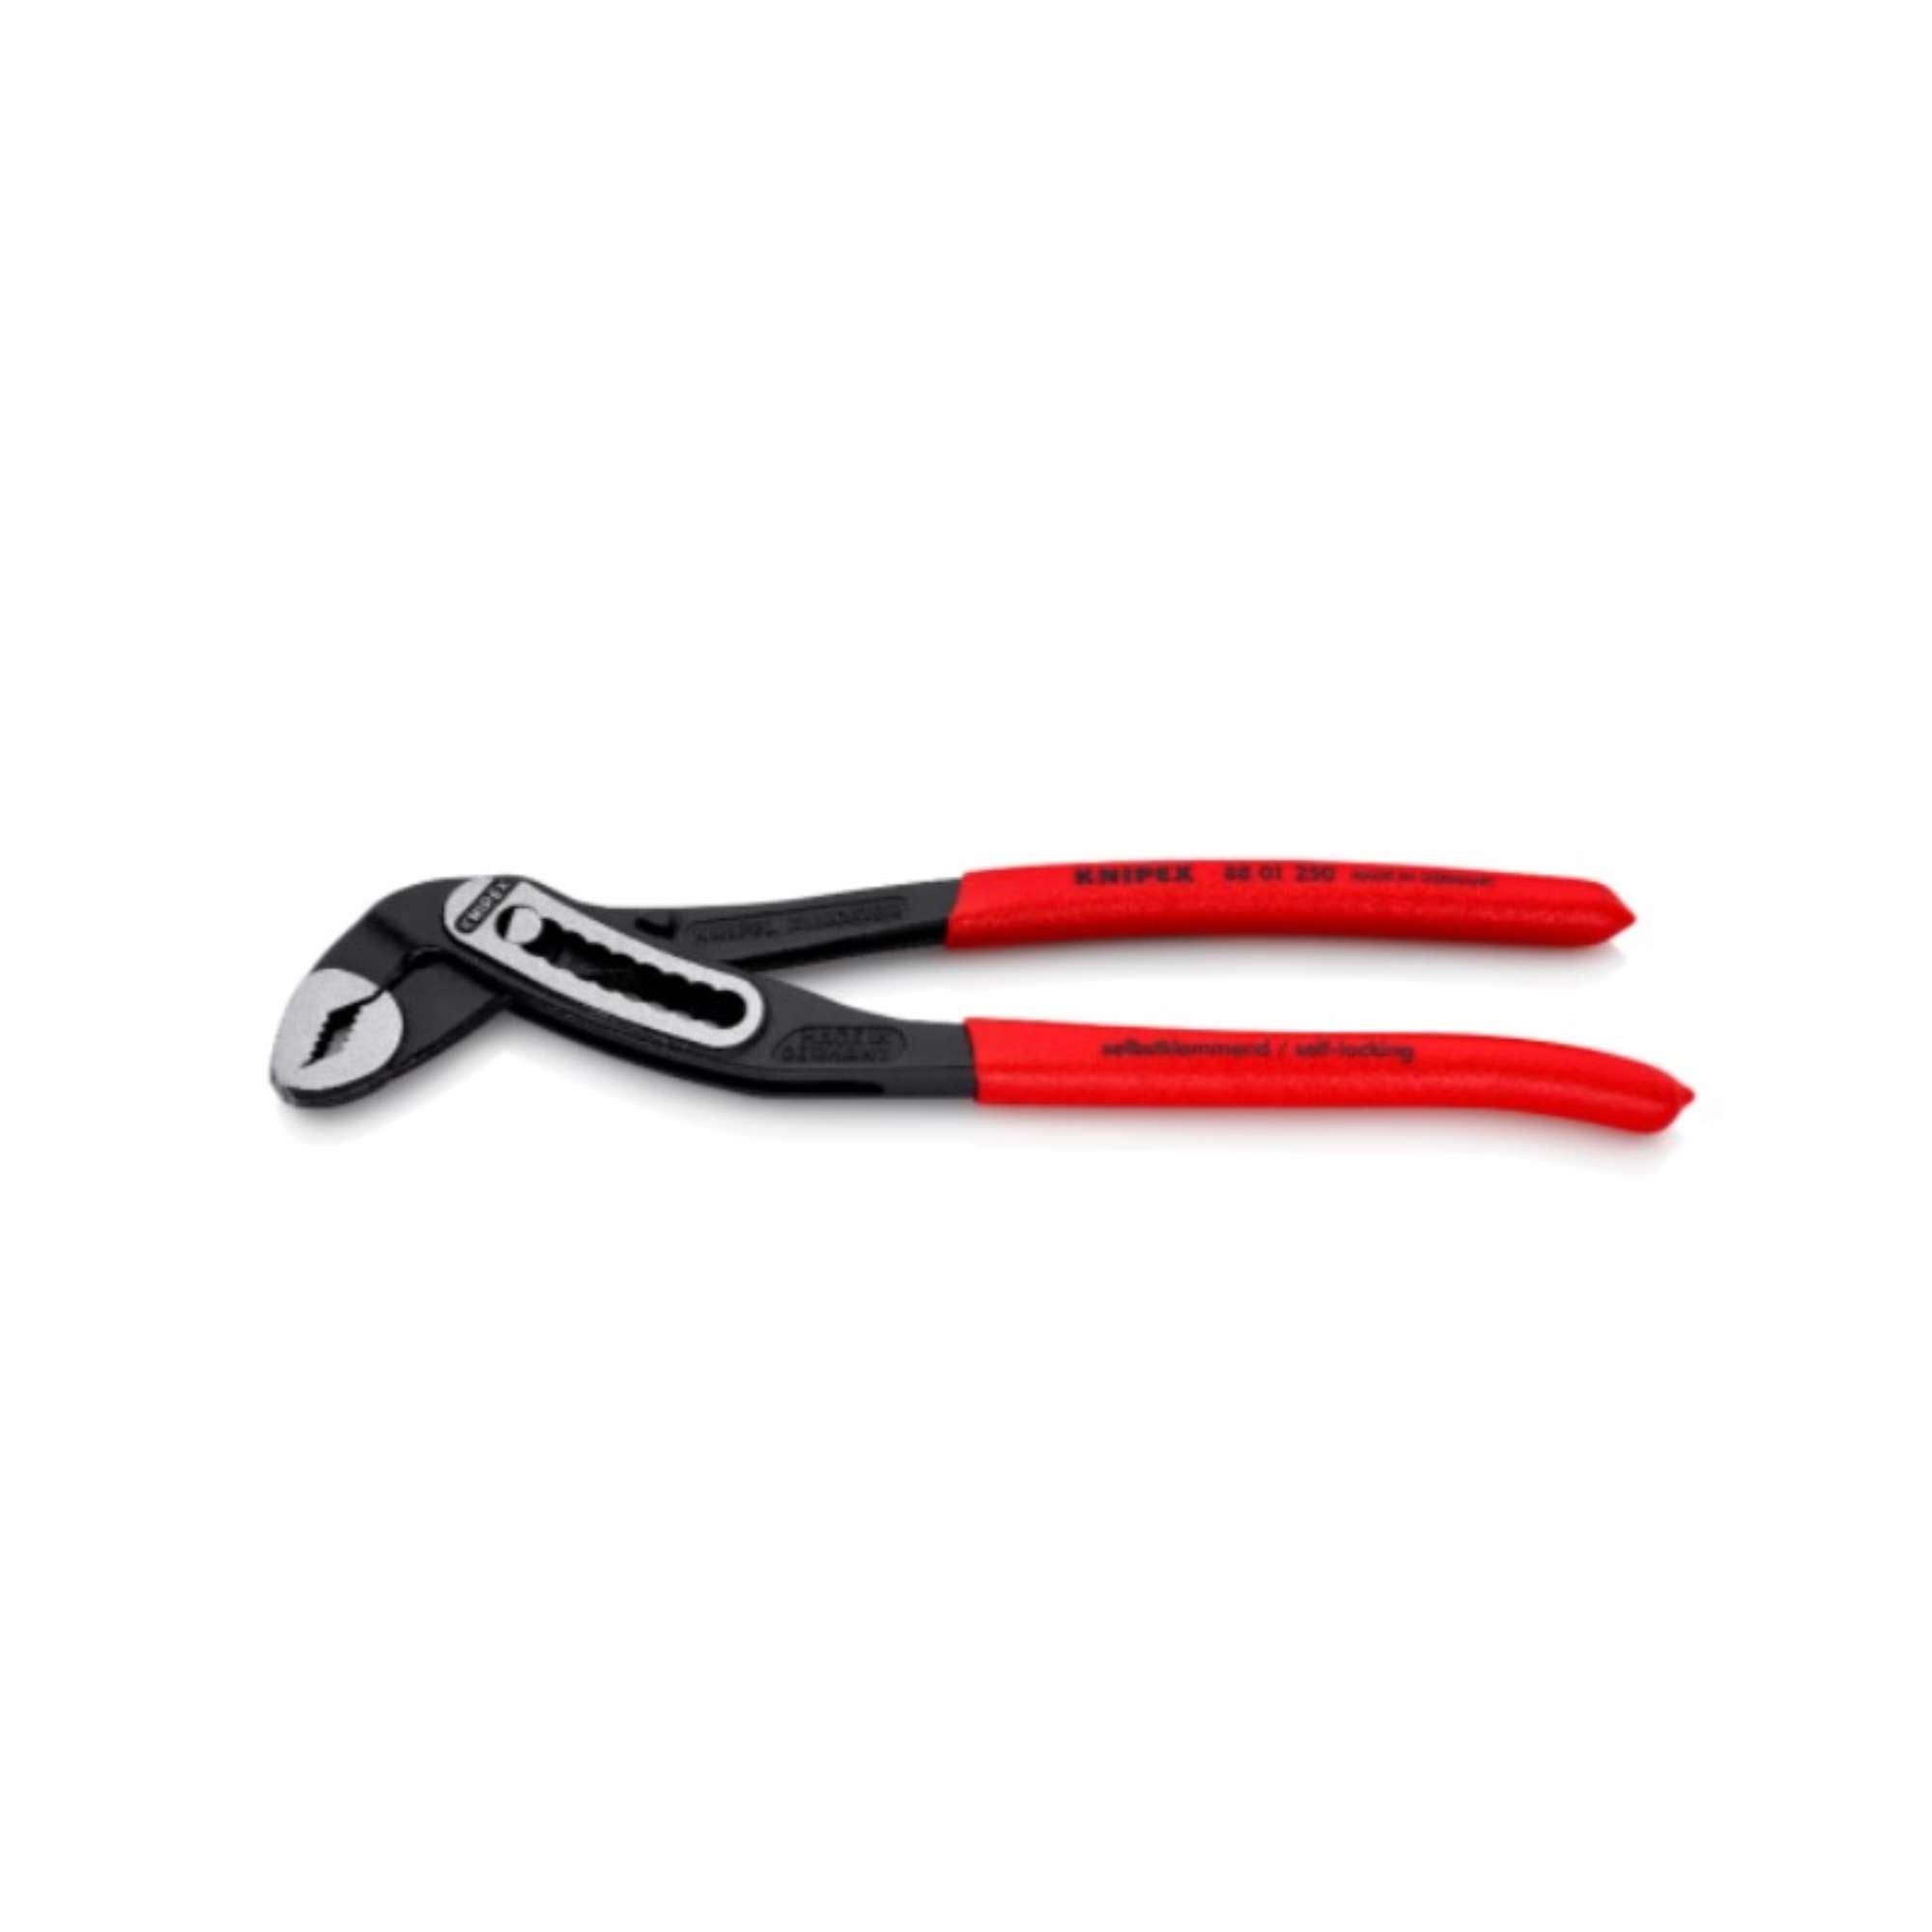 Adjustable Pipe and Nut Pliers - Knipex Alligator